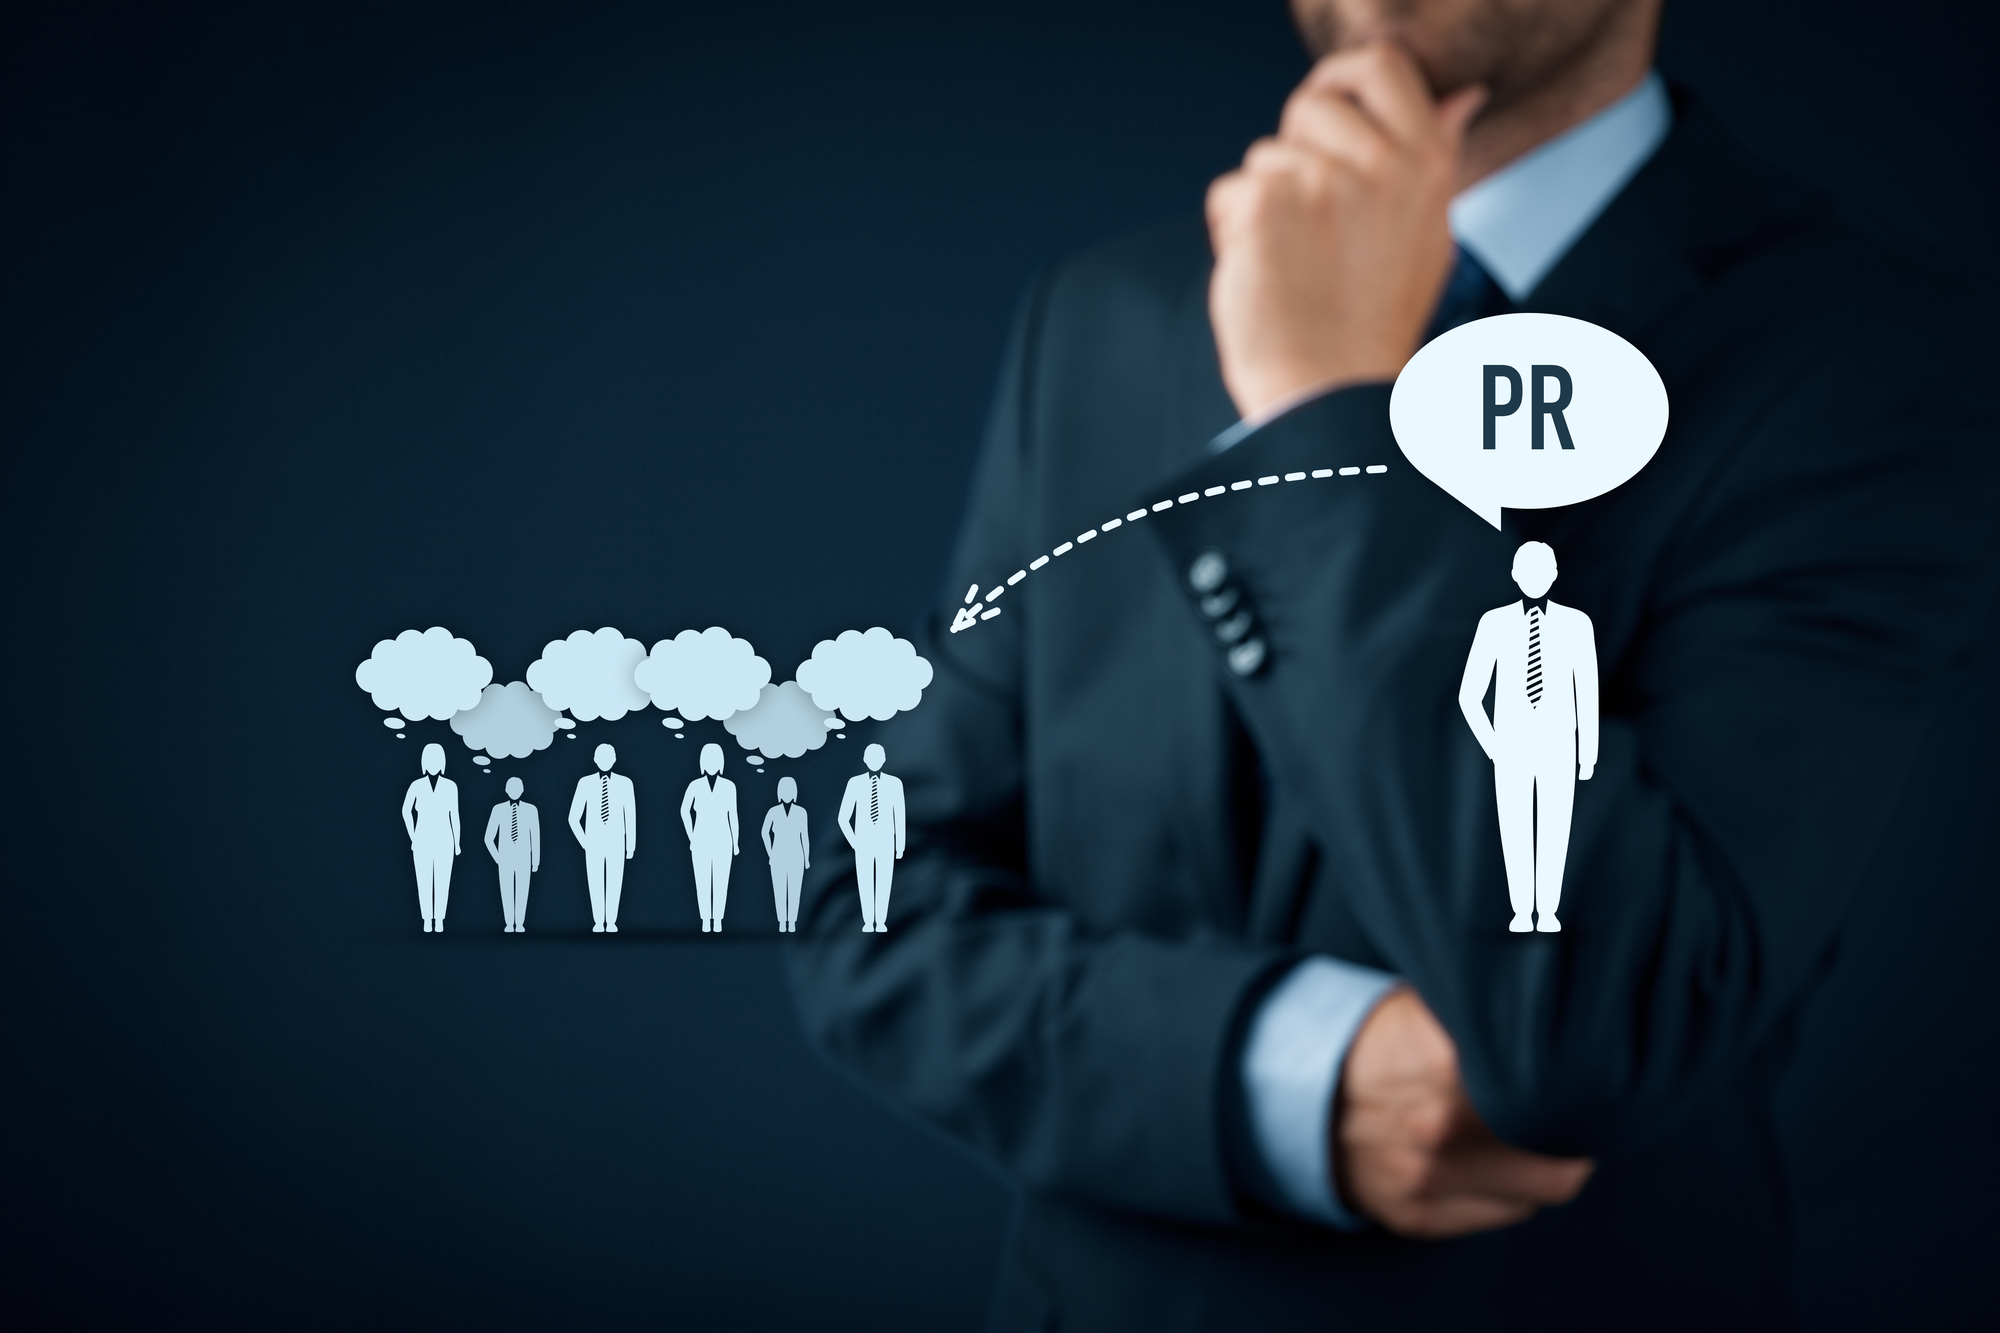 How a press release can amplify your business's voice